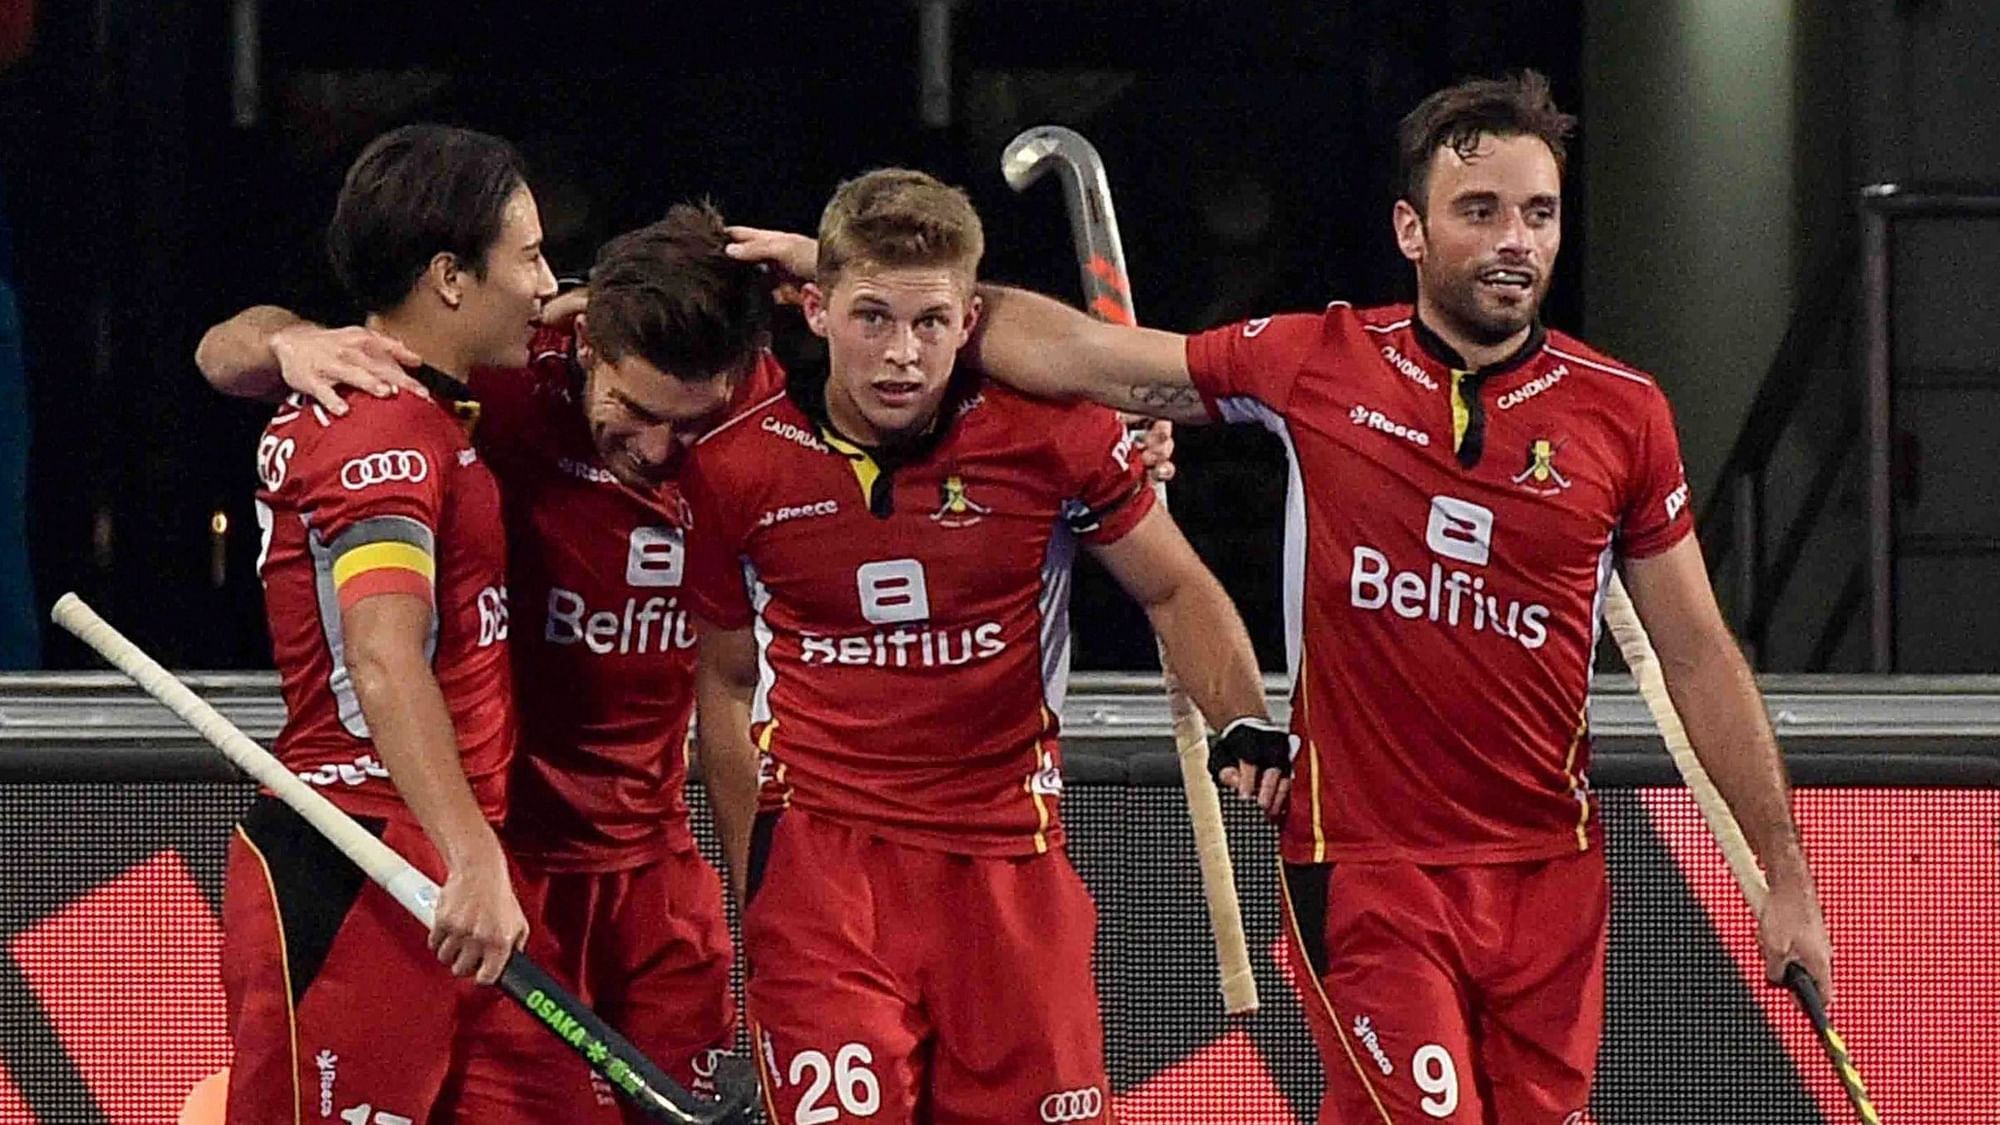 Olympic silver medallist Belgium created history by reaching their maiden final of men’s hockey World Cup.